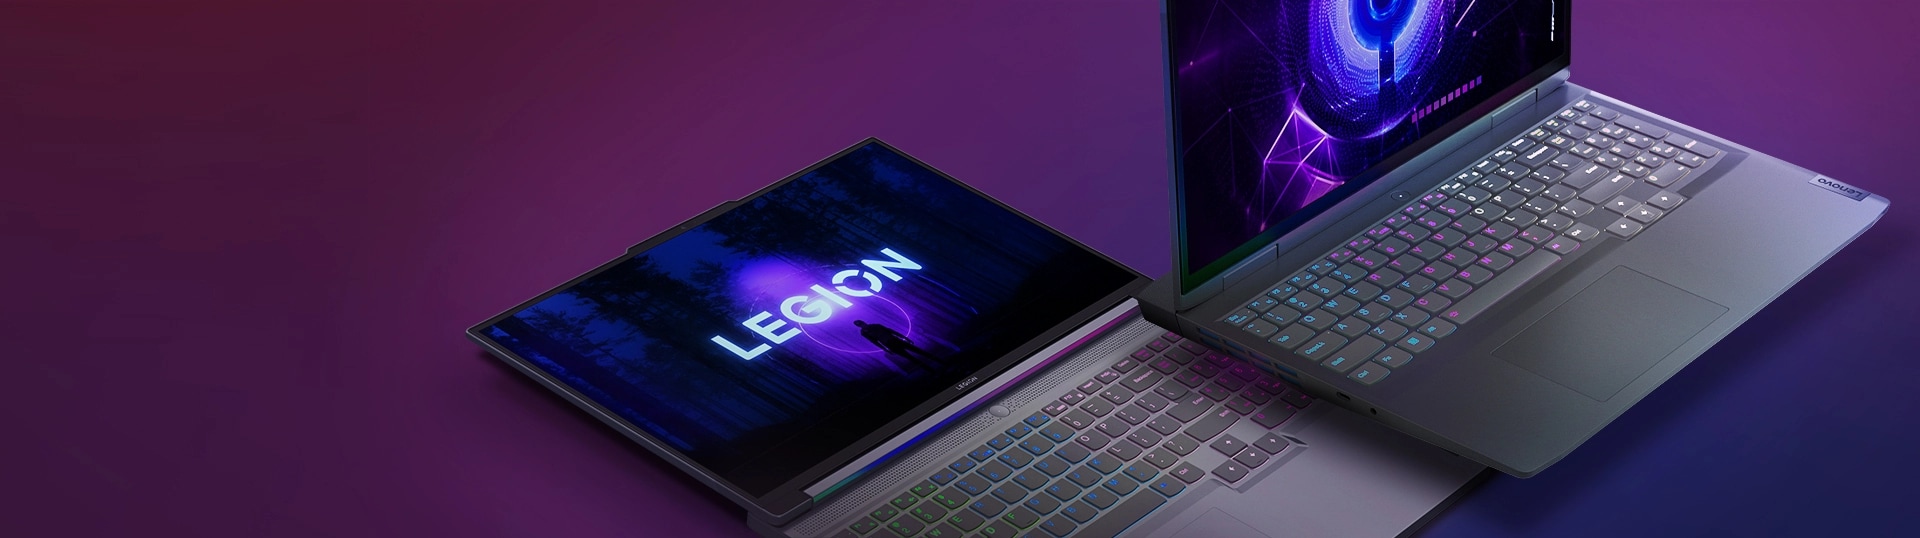 Two gaming laptops shown side by side.